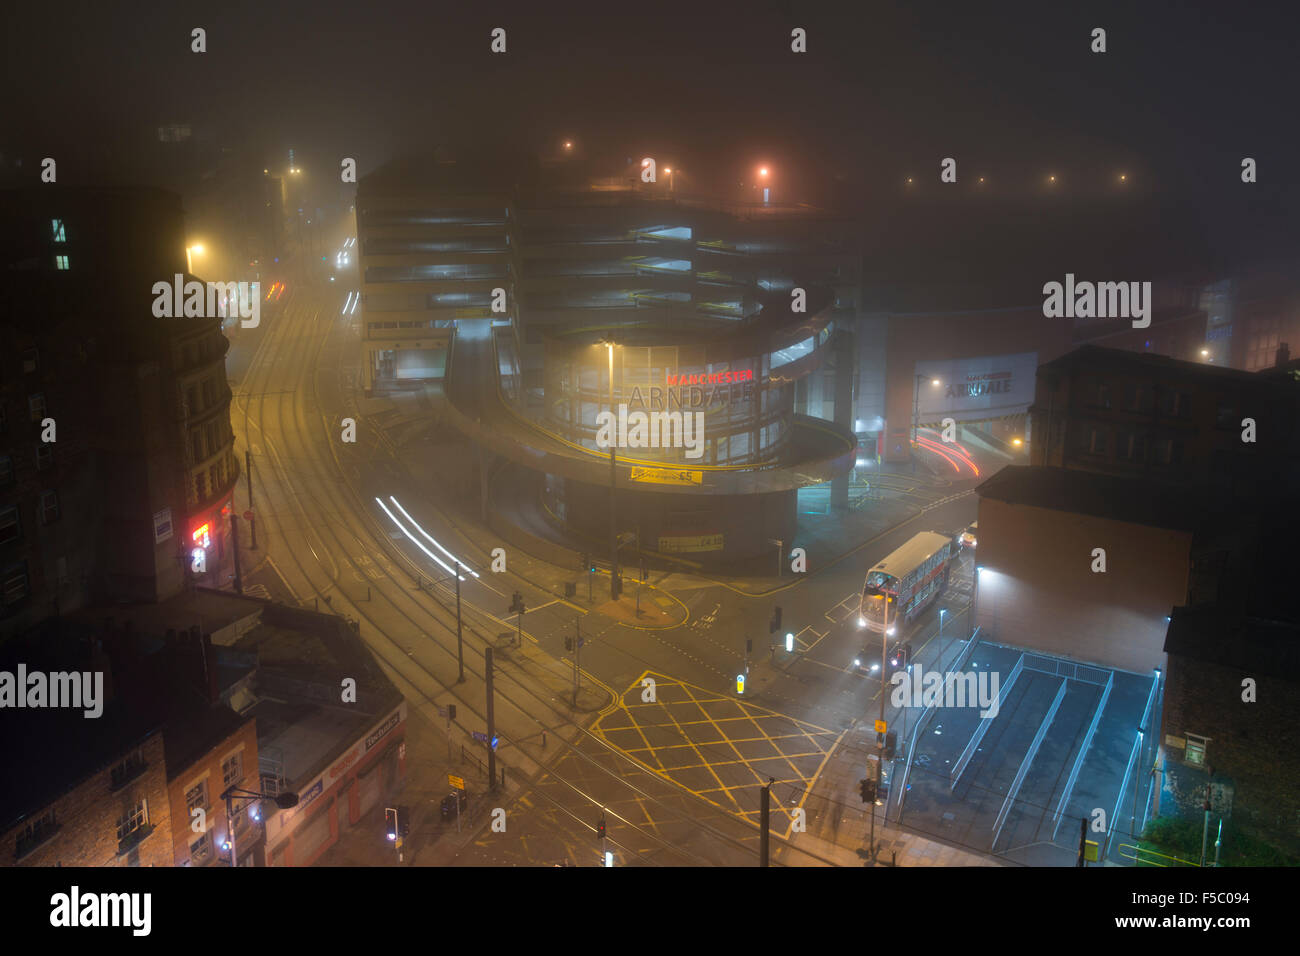 MANCHESTER, UK. 1st November 2015. A view of Shudehill, High Street and Withy Grove in the Northern Quarter area of Manchester as dense fog descends on the city centre during the late evening Credit:  Russell Hart/Alamy Live News. Stock Photo